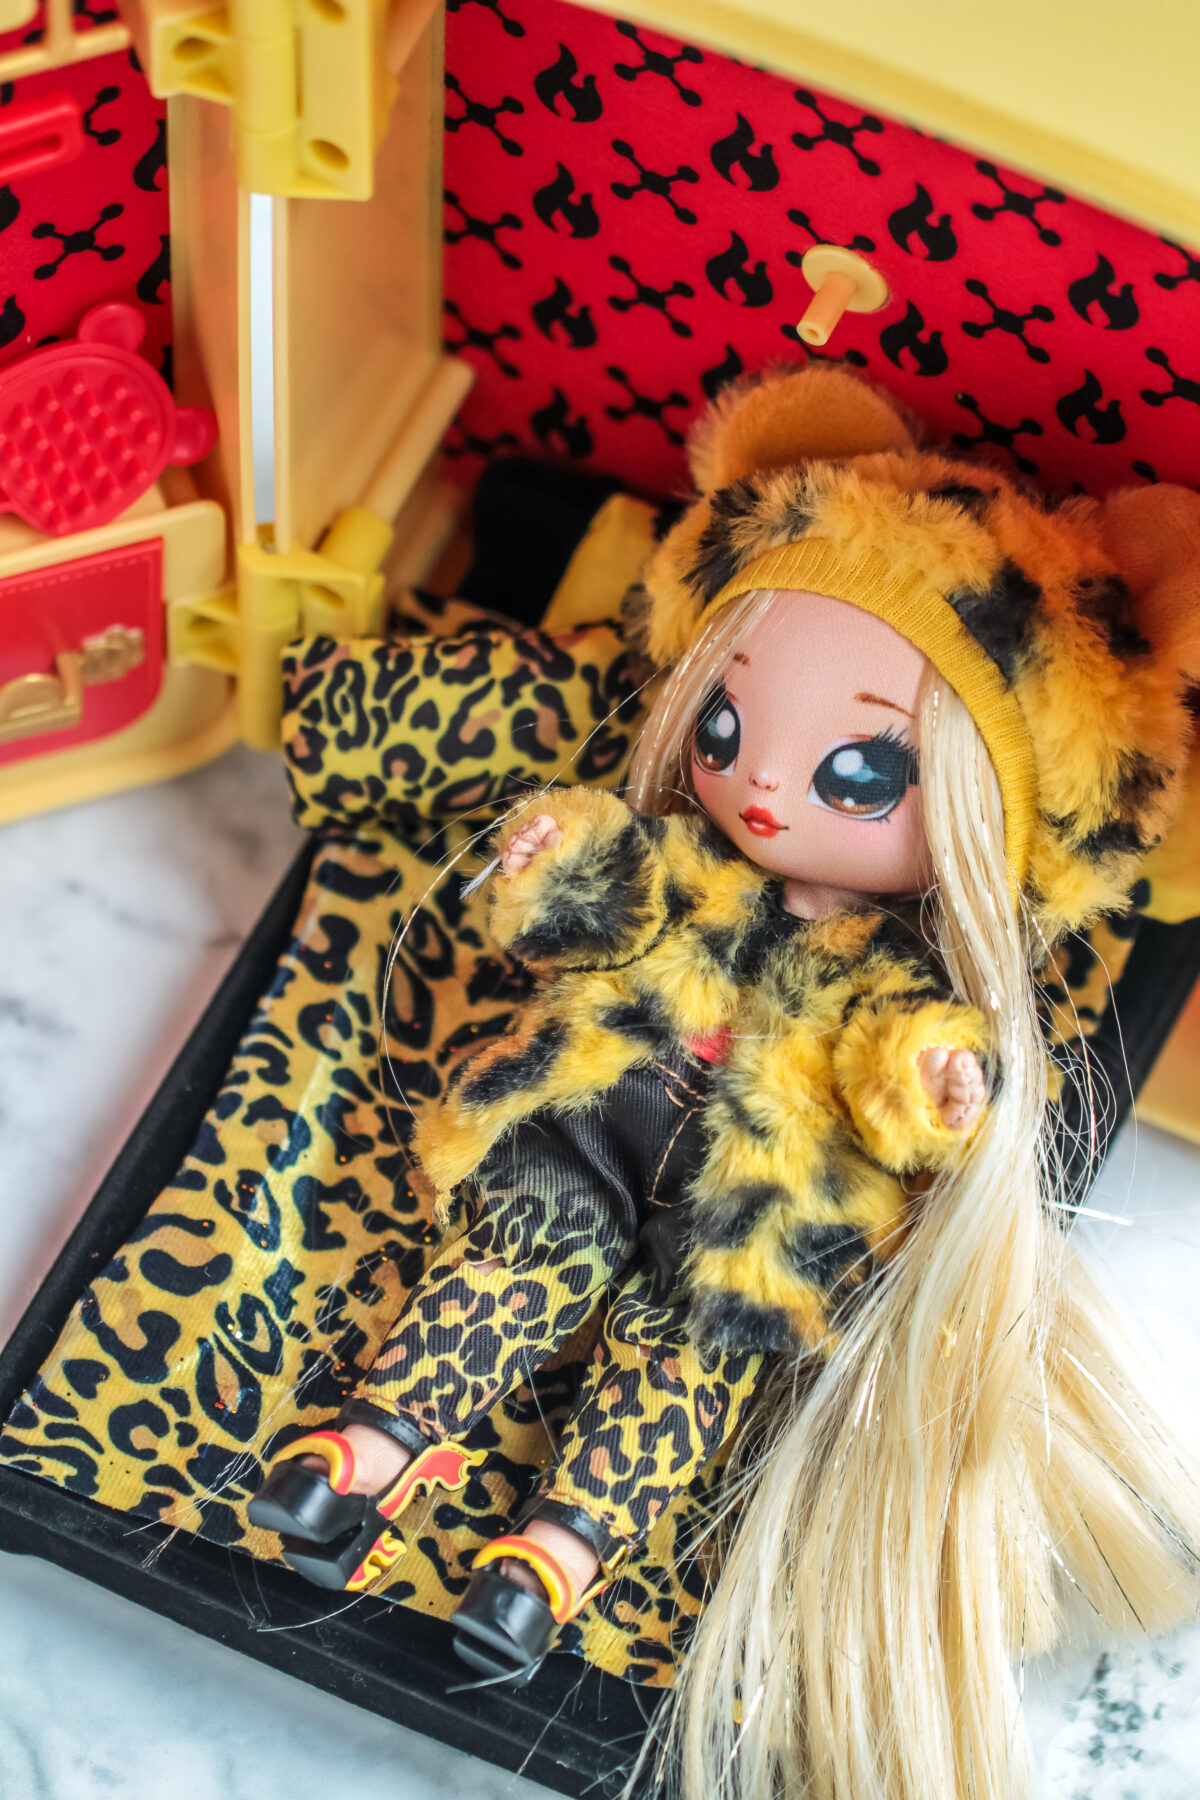 The Na! Na! Na! Surprise 3-in-1 Backpack Bedroom Playset is a fuzzy jaguar backpack that transforms into an adorable bedroom playset.